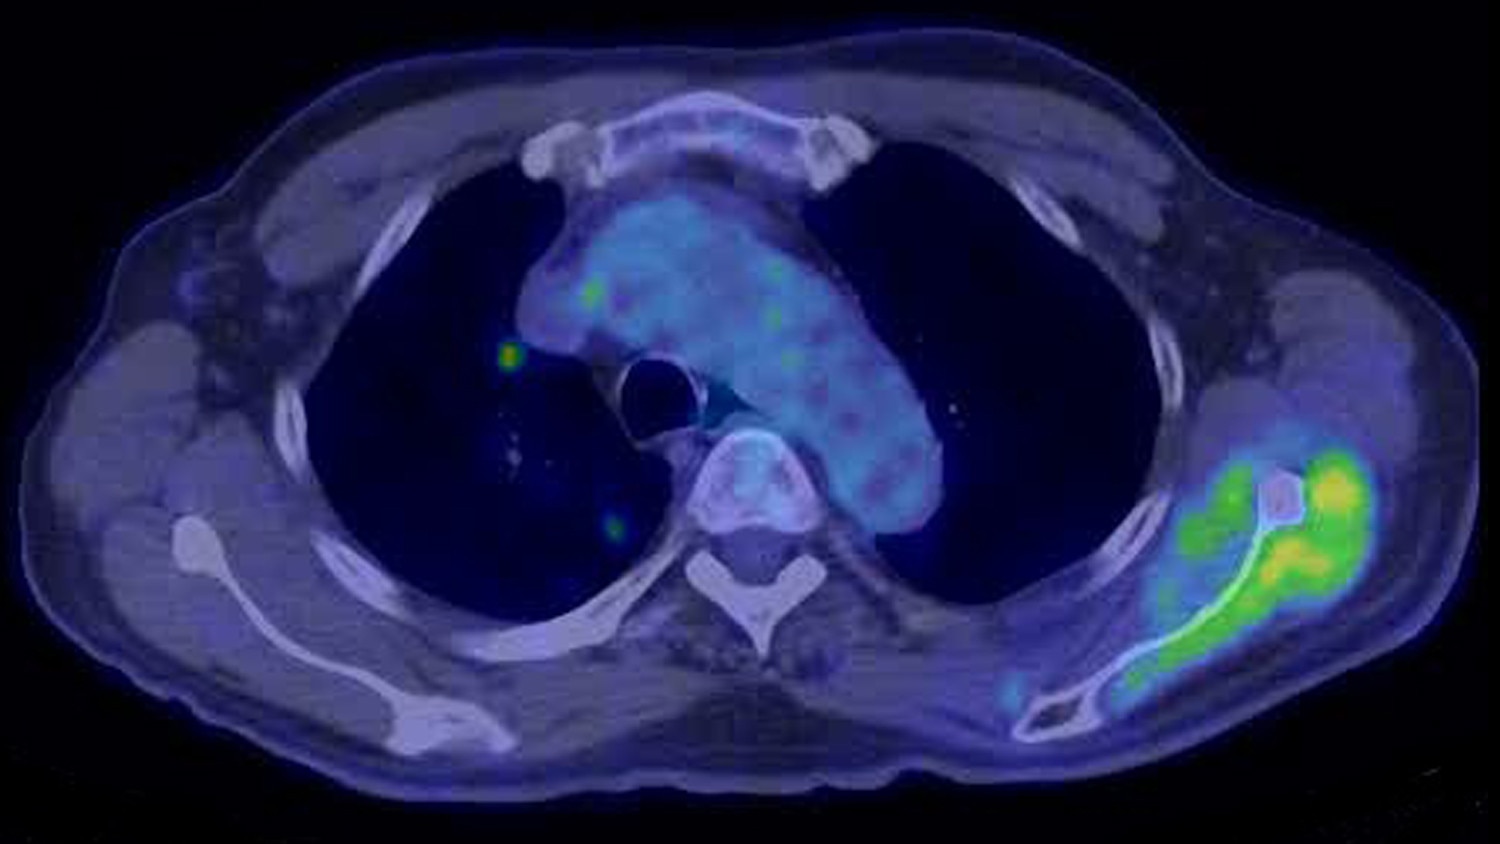 product-product-categories-pet-ct-qclear-gehc-qclear-case2_thumbnail.jpg